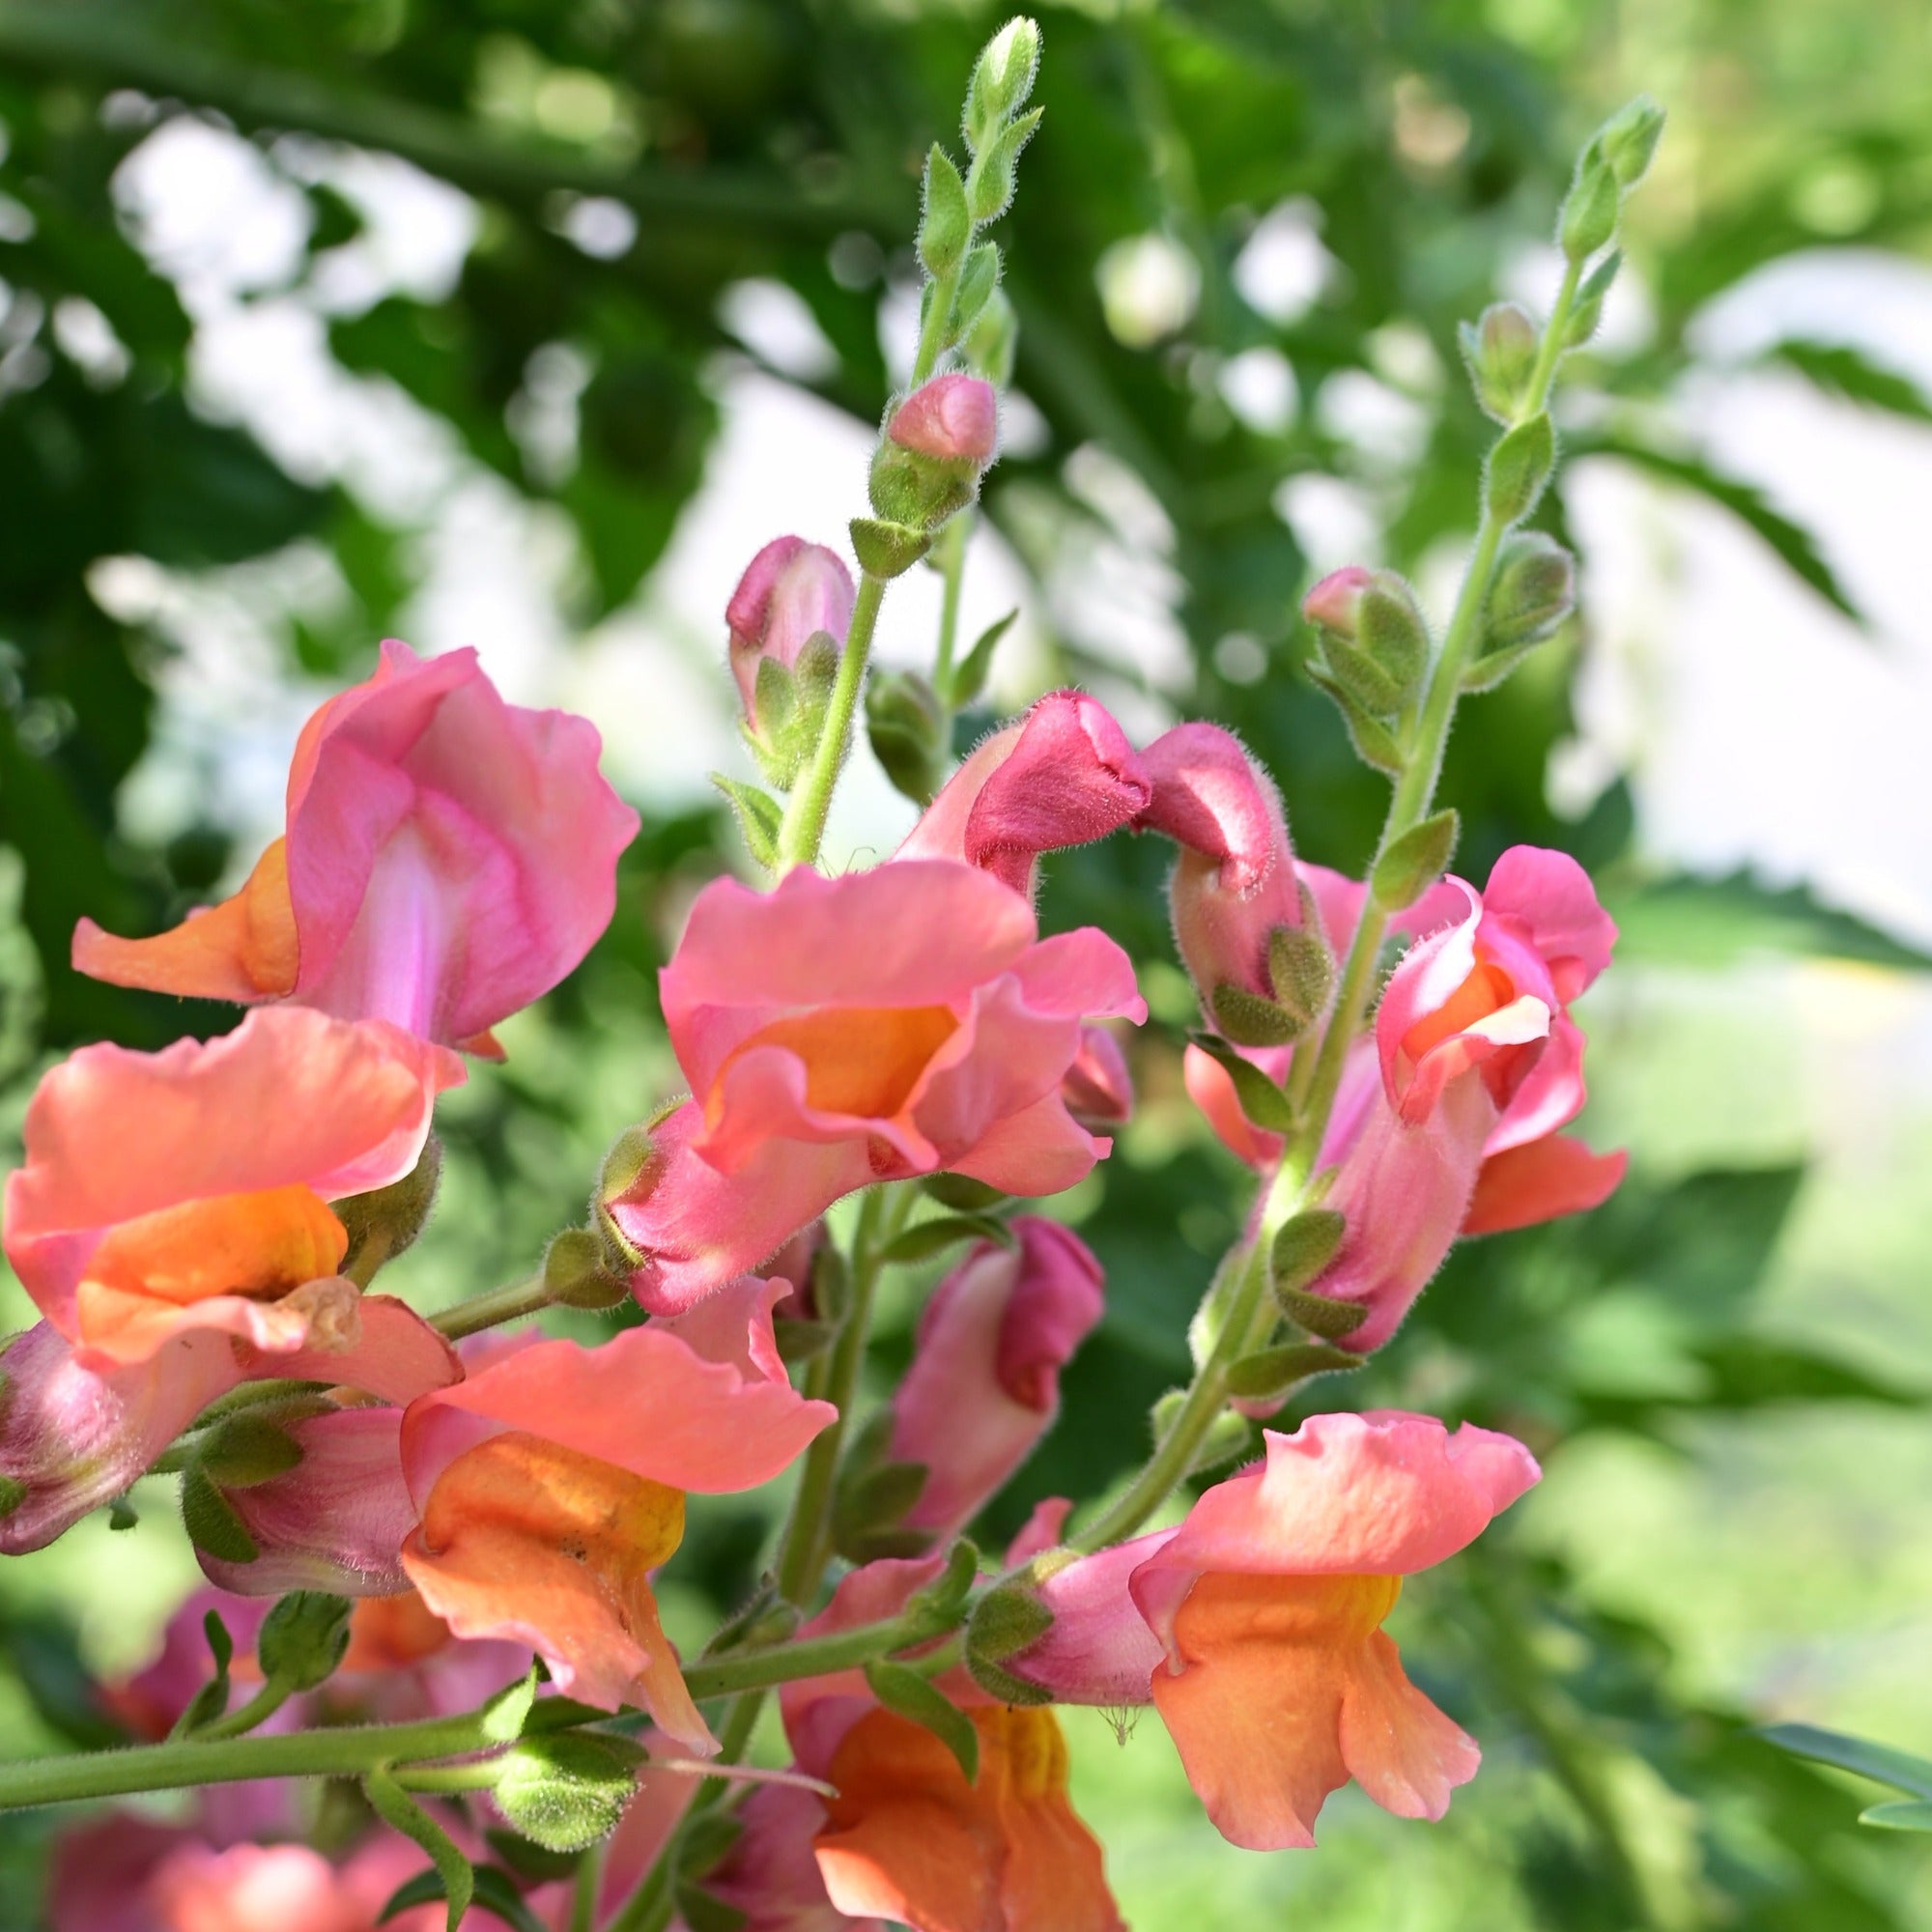 A group of orange wonder snapdragon blooms in the foreground with green garden blurred out in the background